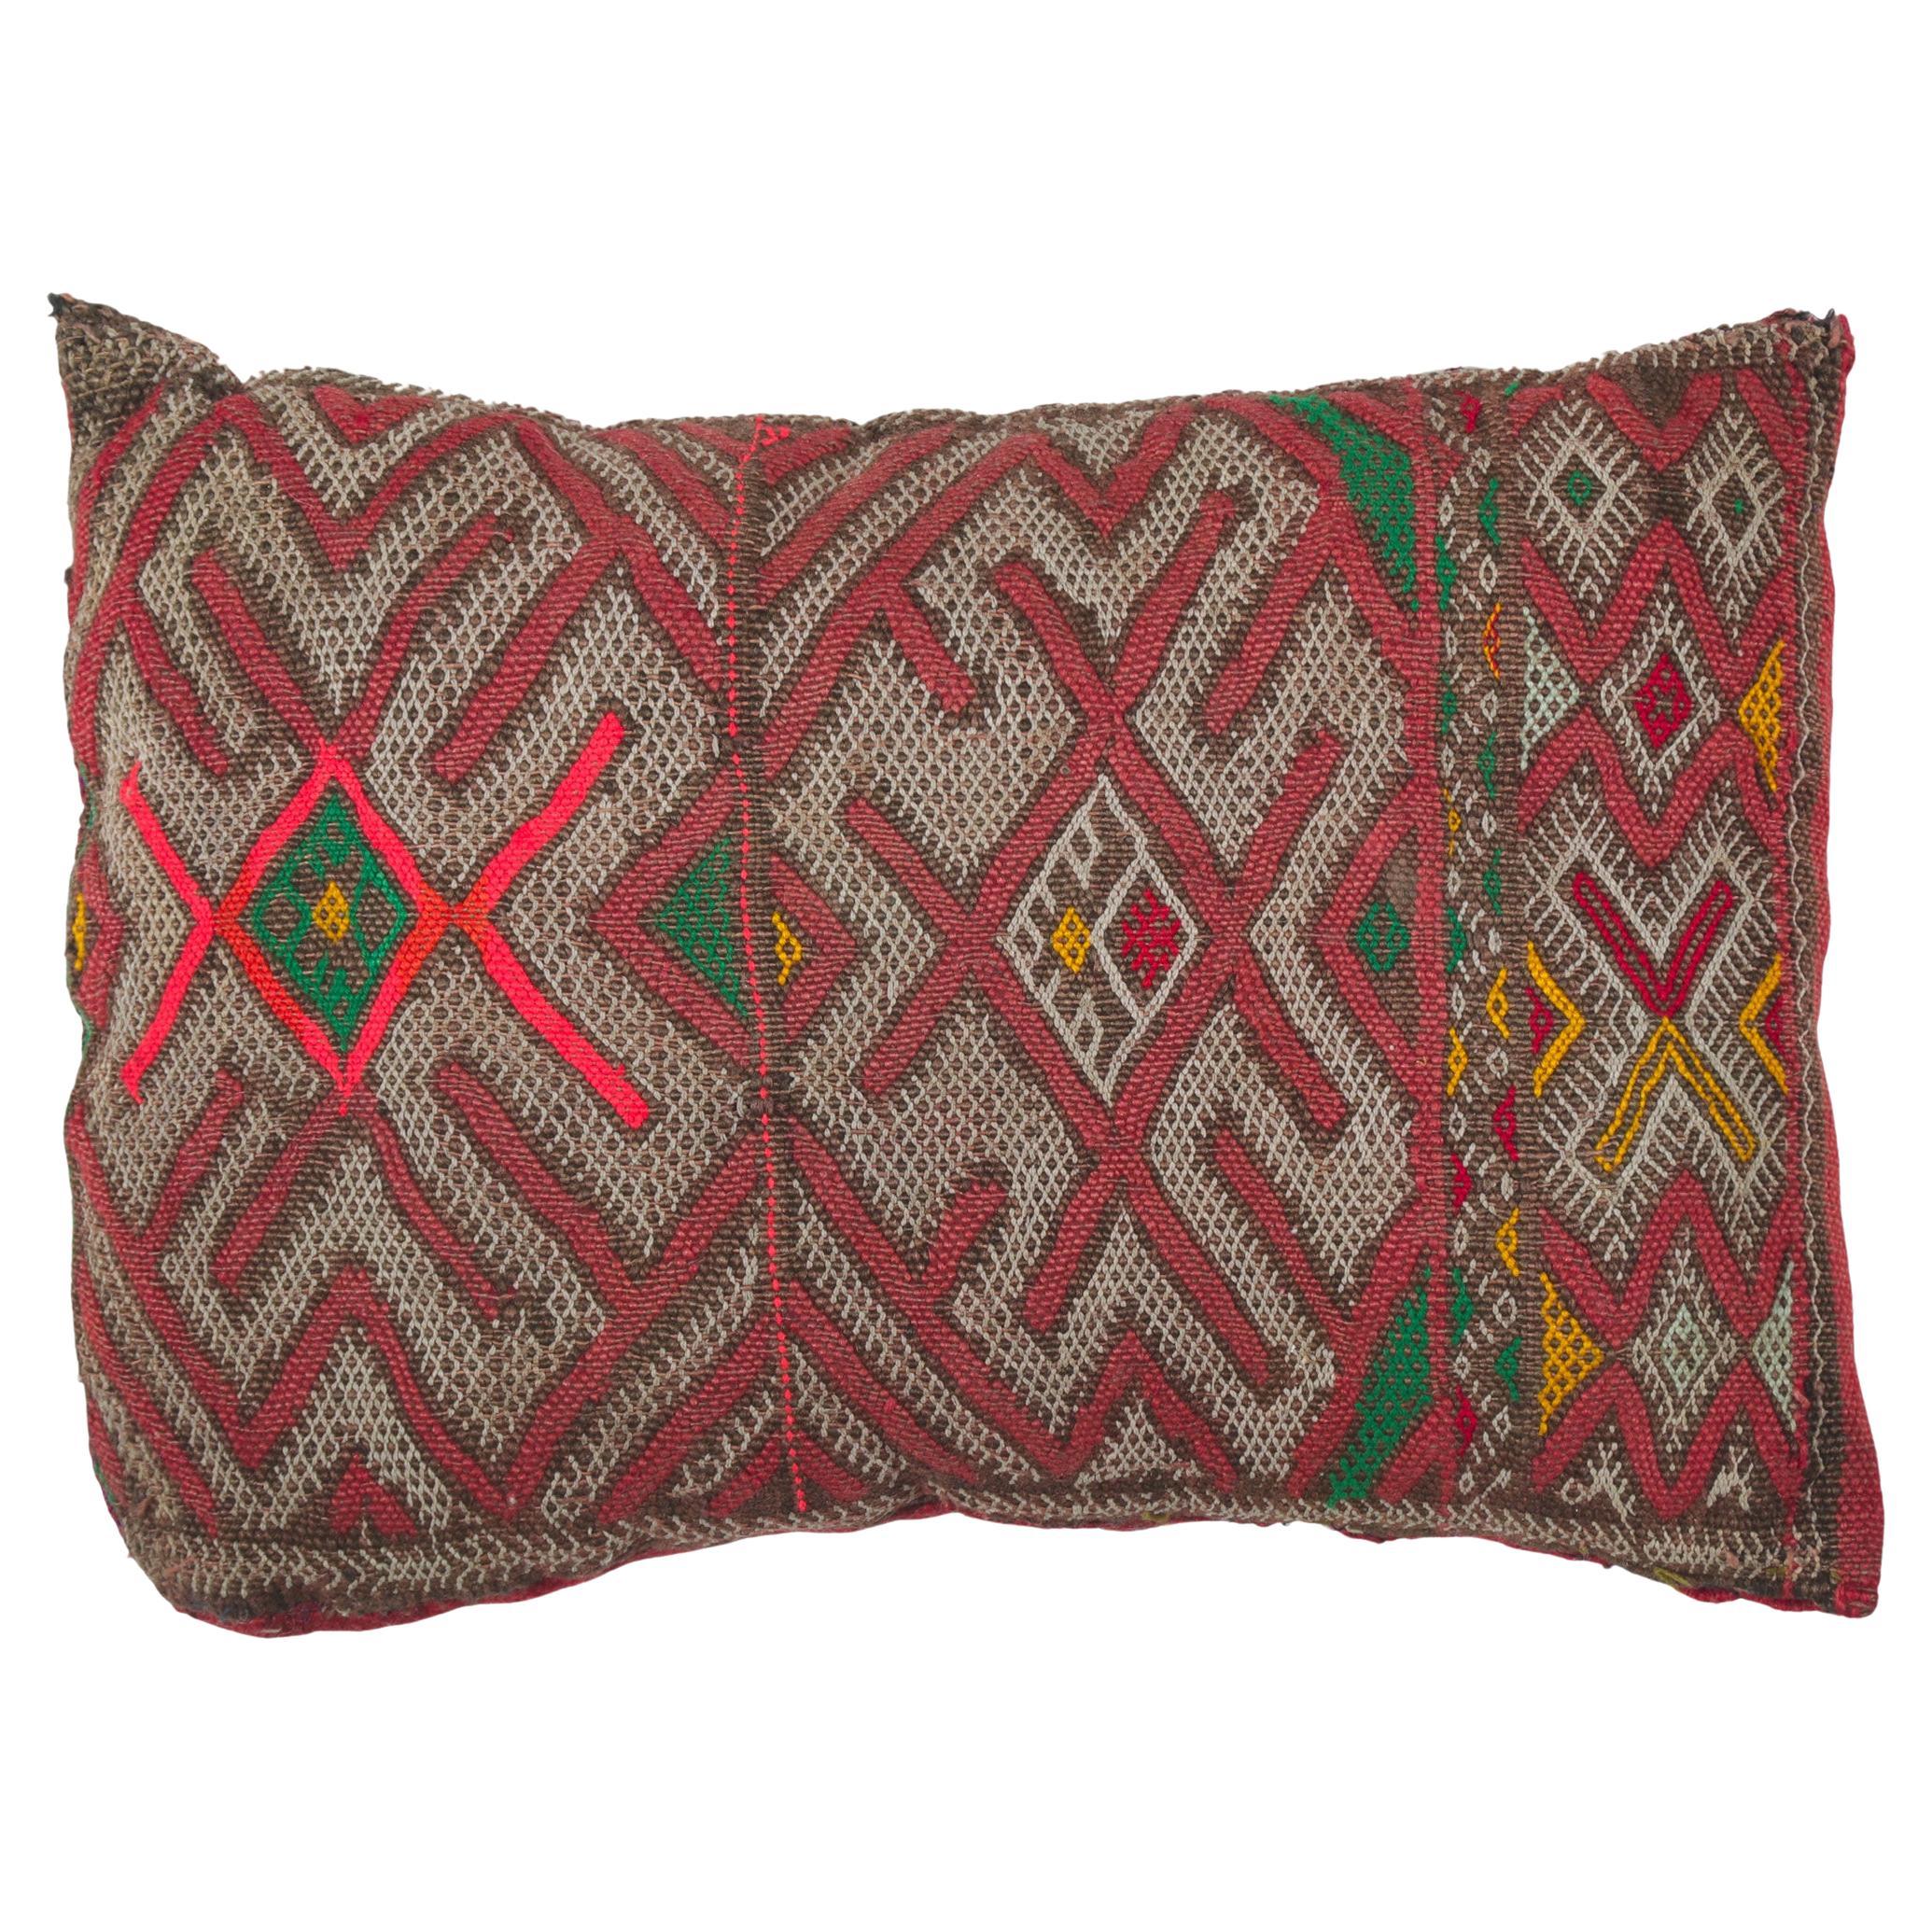 Vintage Zemmour Moroccan Rug Pillow by Berber Tribes of Morocco